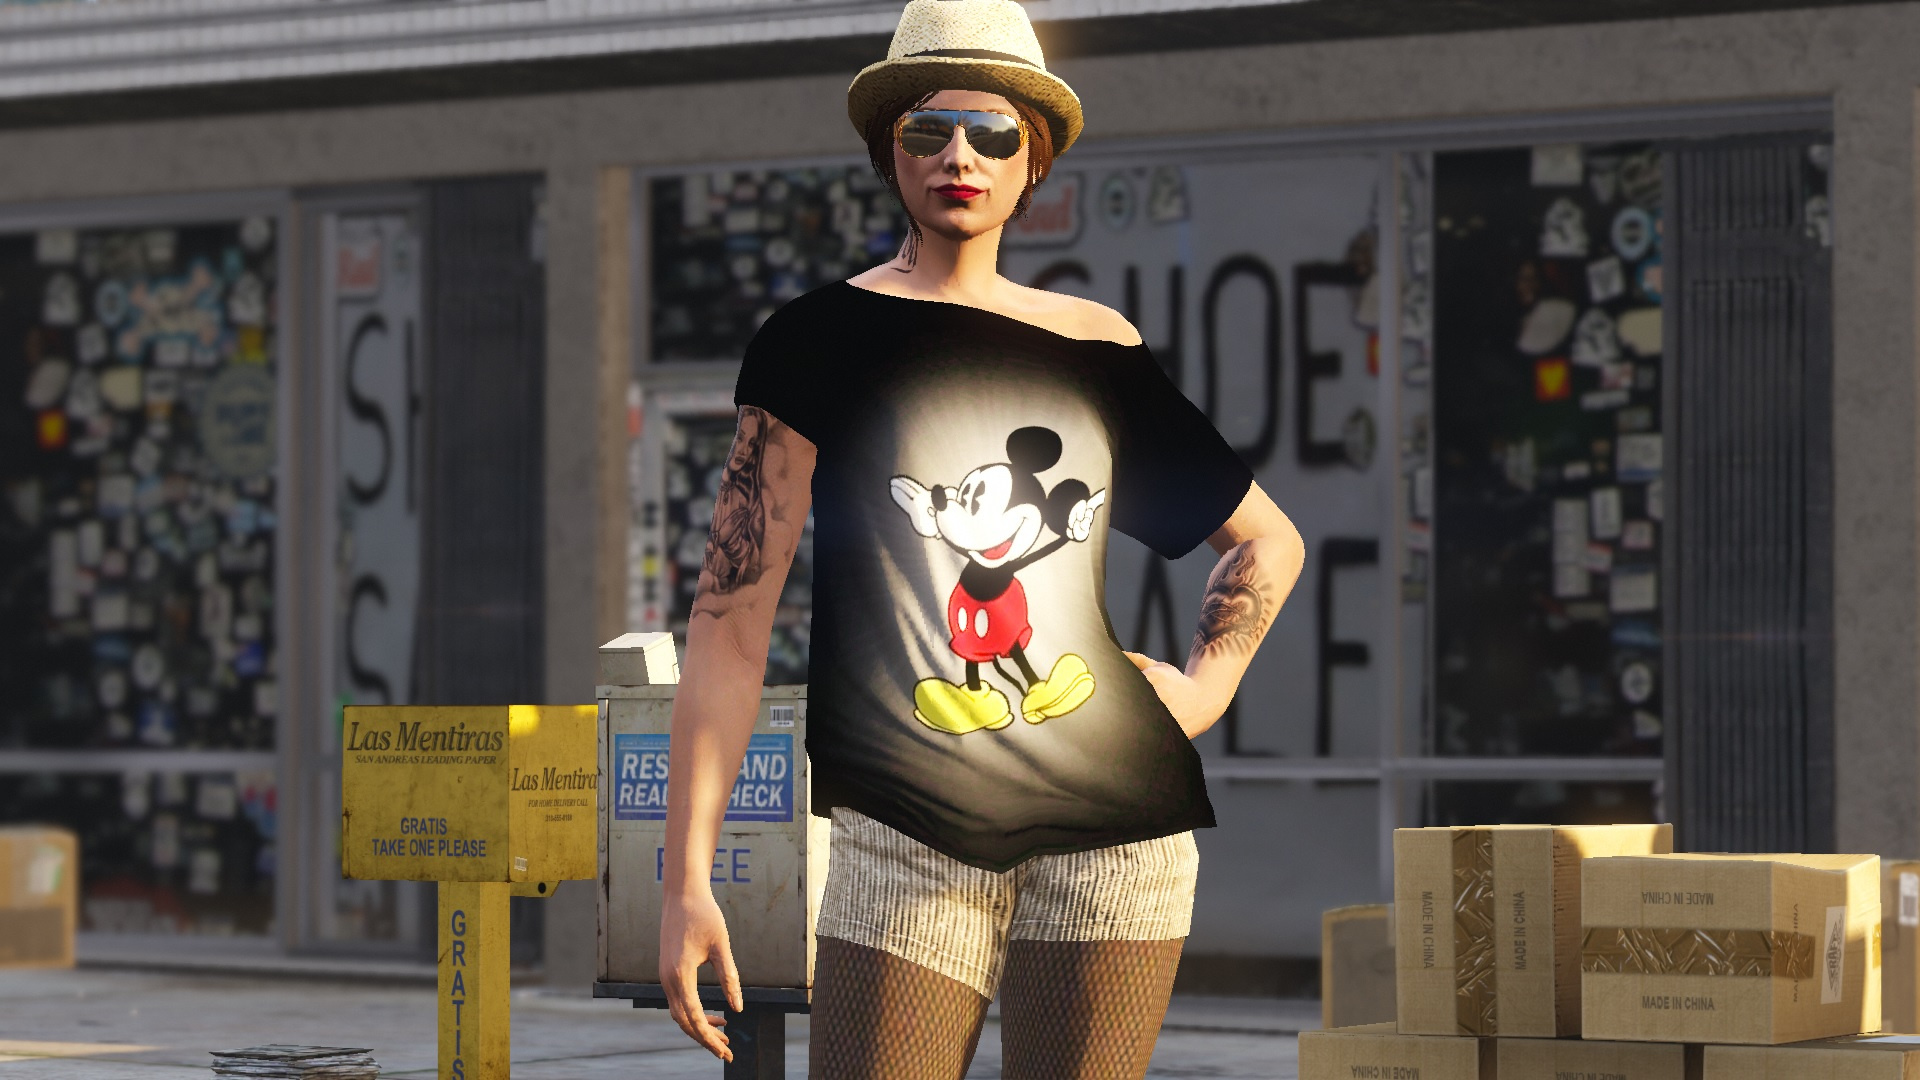 Cluckin bell gta 5. Male clothes GTA 5. MPCLOTHES - Addon Clothing Slots 2.0 GTA 5.